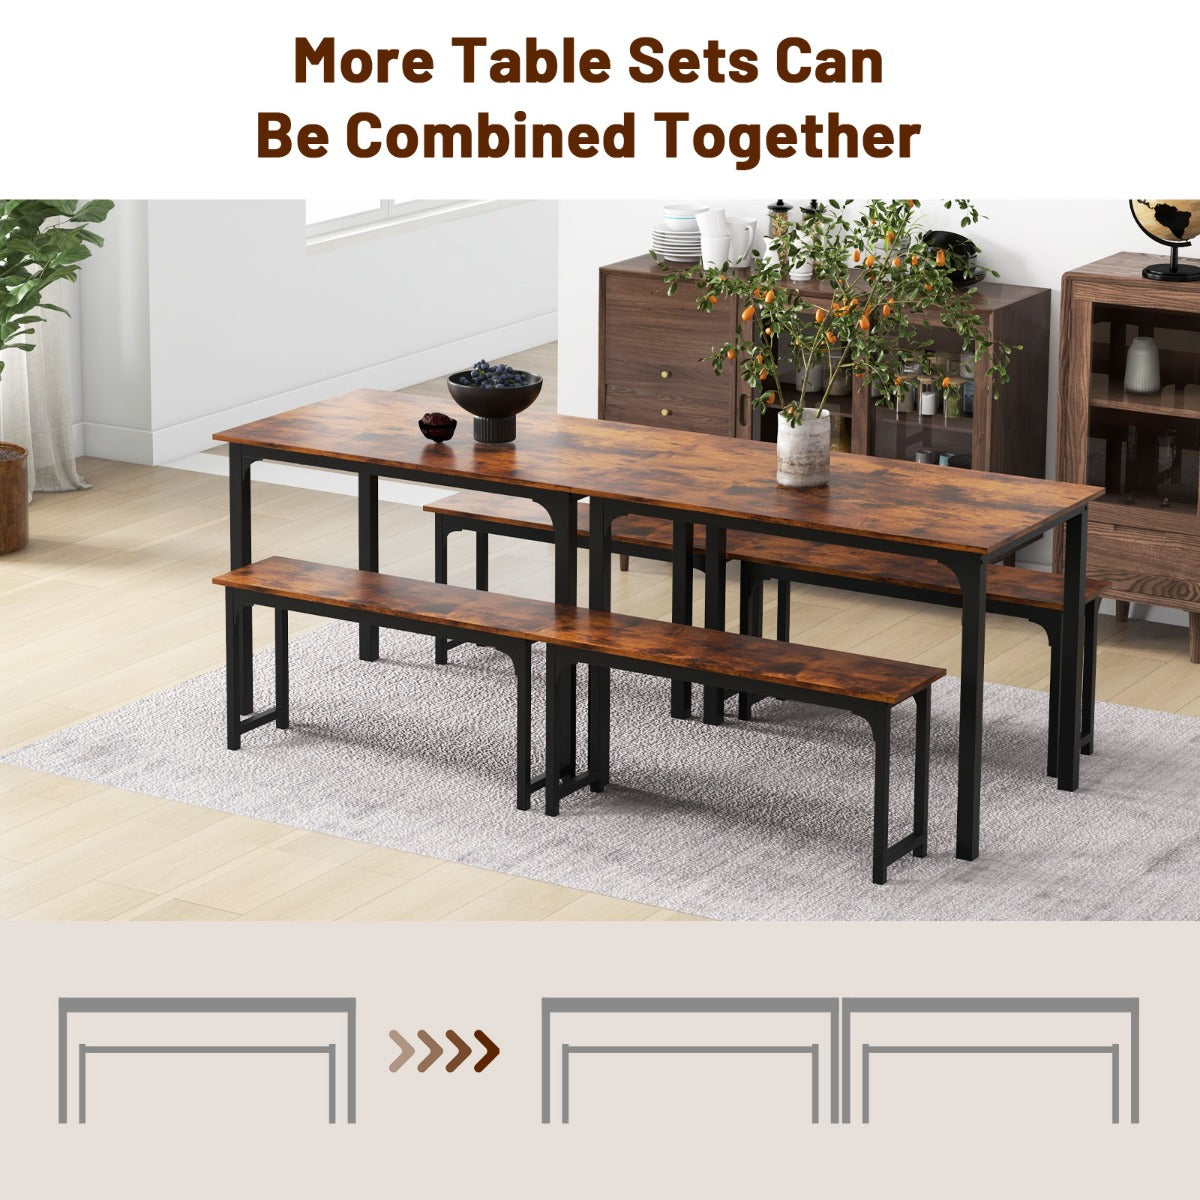 3 Pieces Space-Saving Dining Breakfast Table Set with 2 Benches-Coffee